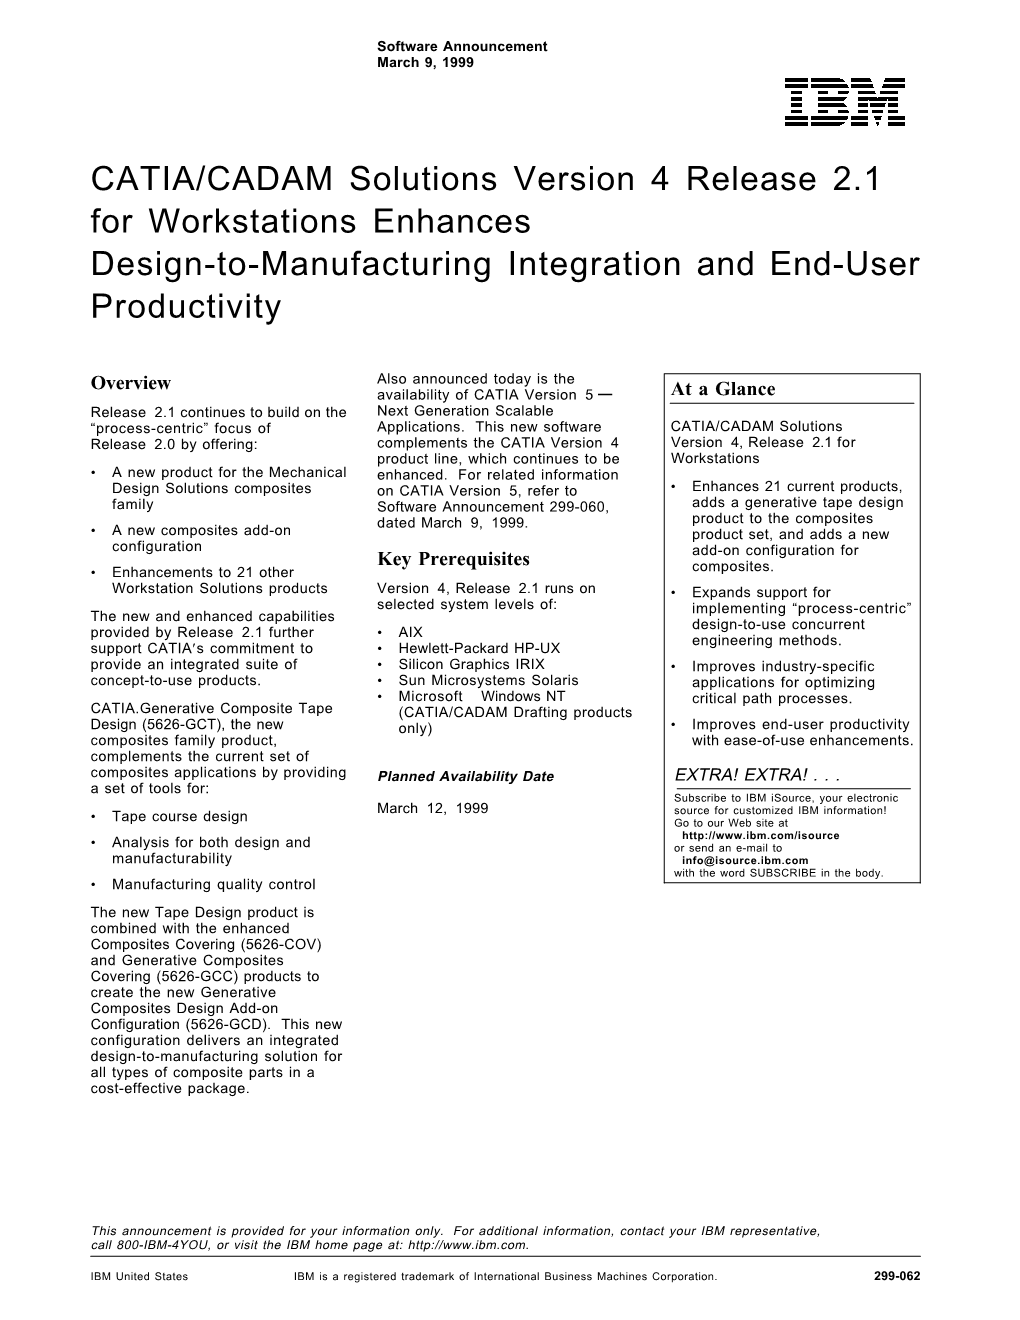 CATIA/CADAM Solutions Version 4 Release 2.1 for Workstations Enhances Design-To-Manufacturing Integration and End-User Productivity